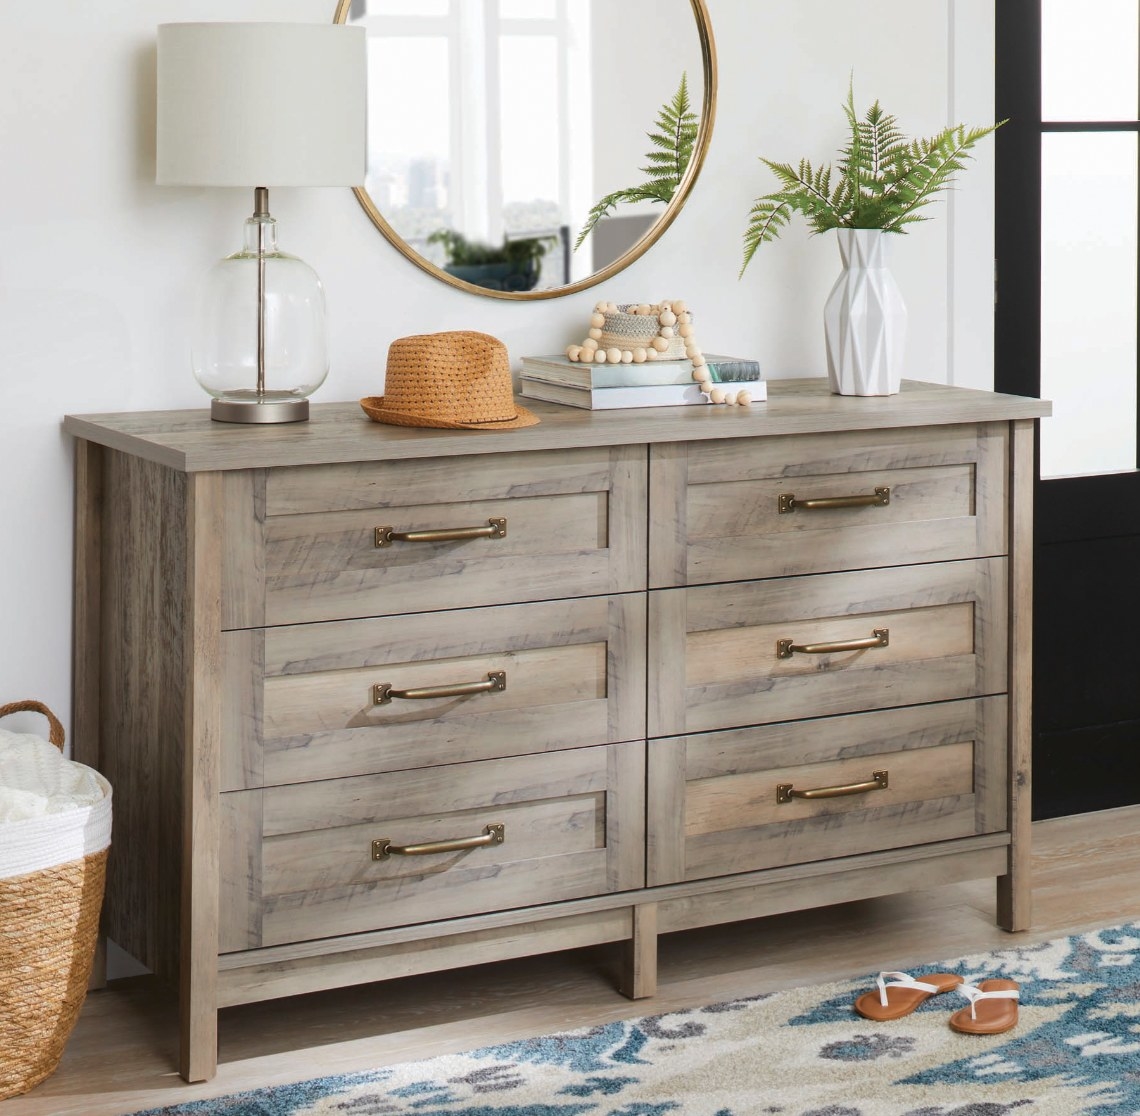 The six-drawer dresser in rustic gray